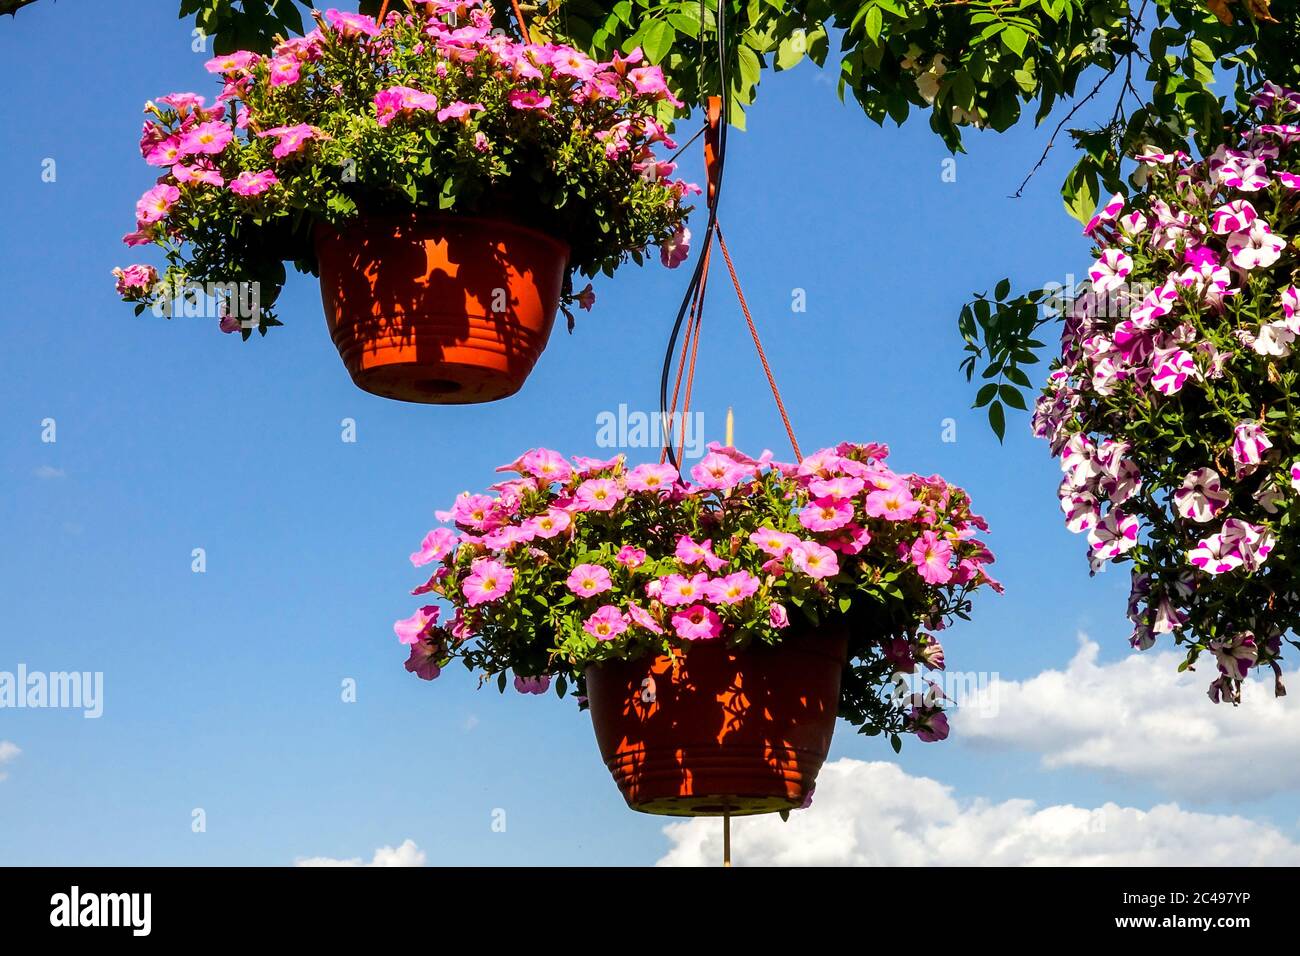 Hanging basket two baskets with Petunias-Surfinia in a summer garden, flowers, and blue sky background, petunias garden flowers Stock Photo